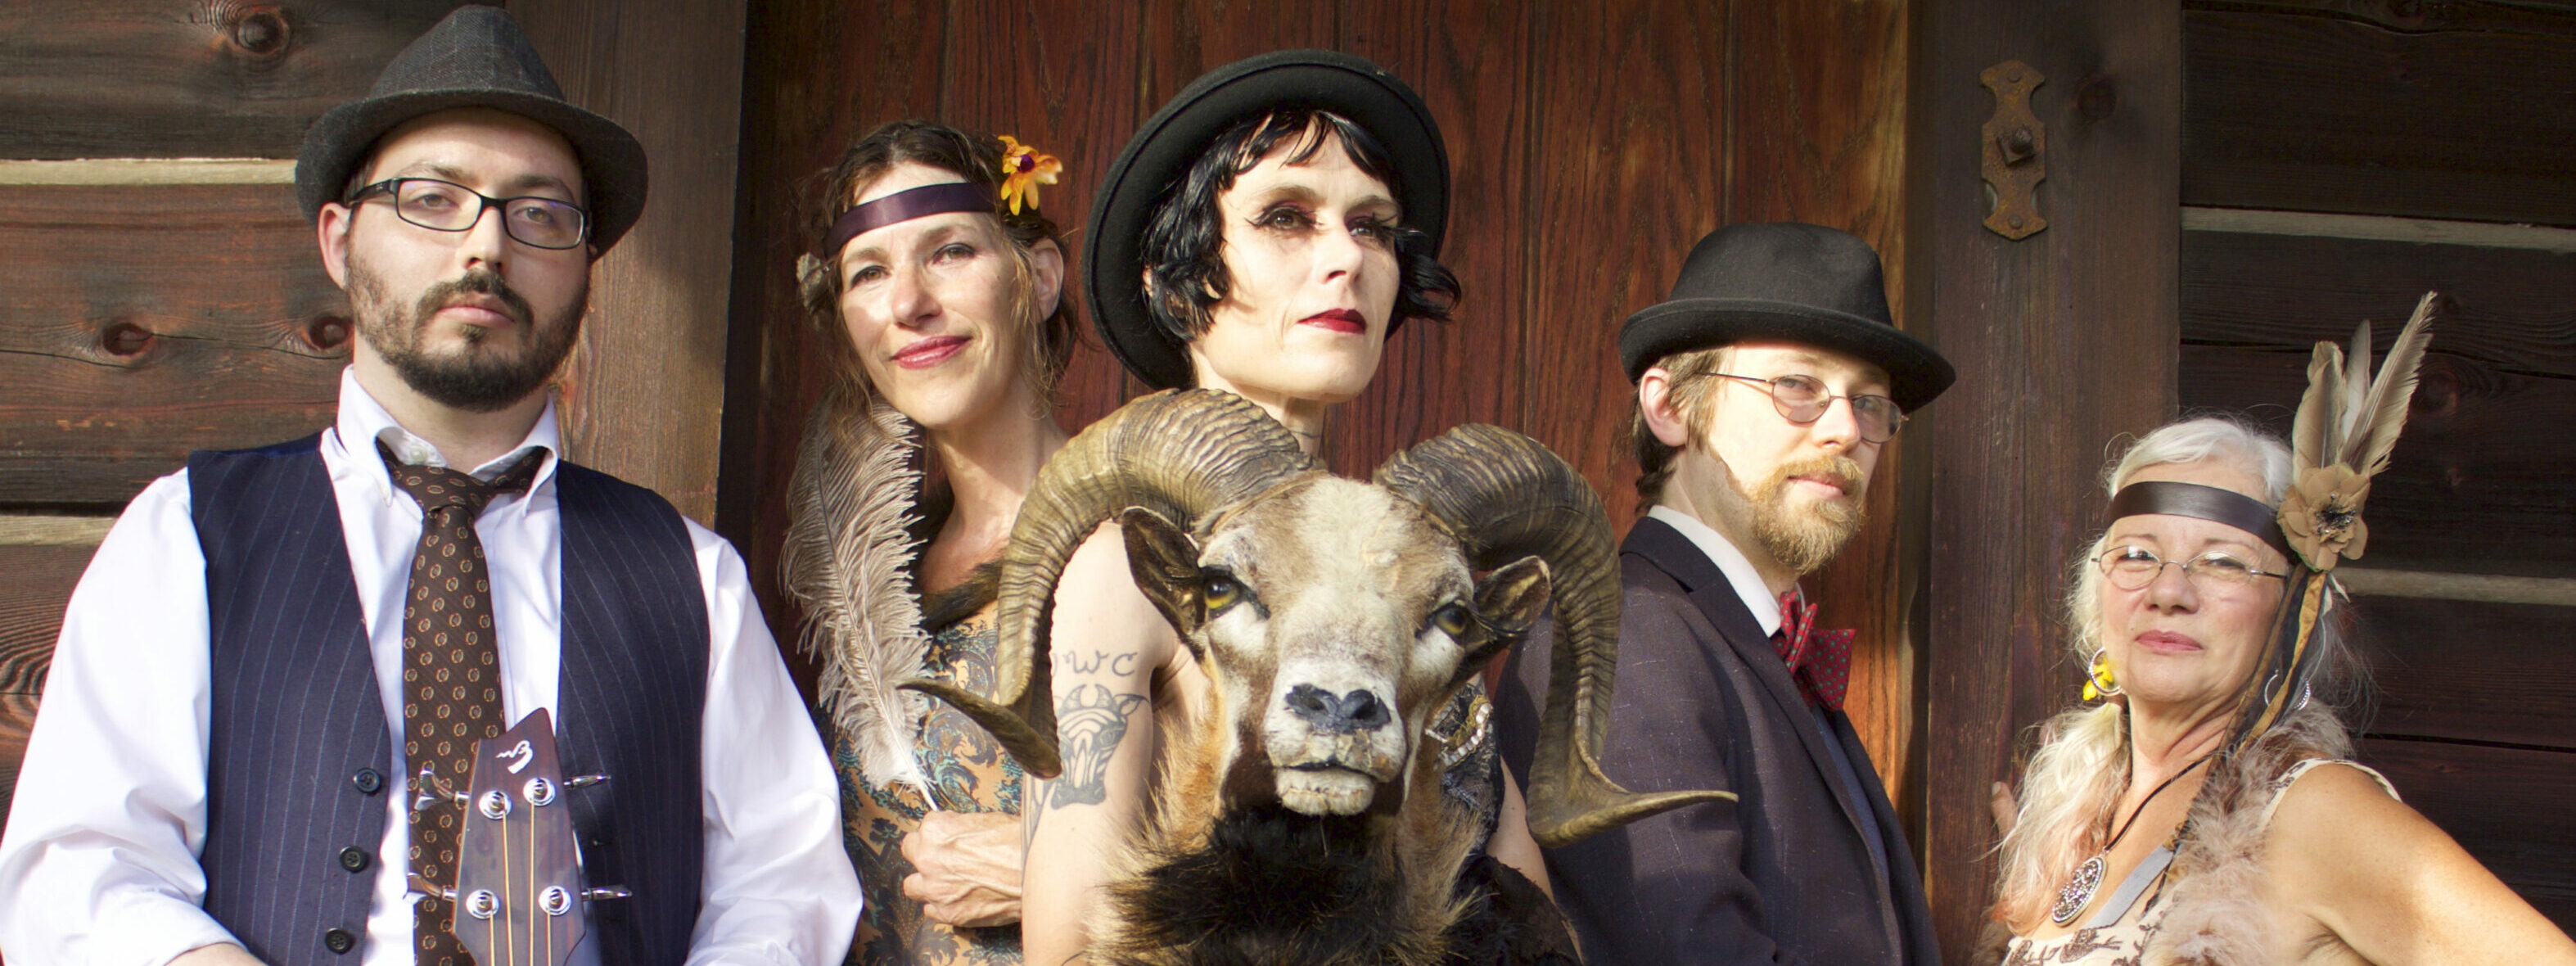 Dust Bowl Faeries Lure Listeners With New Siren Song, “Vampire Tango”